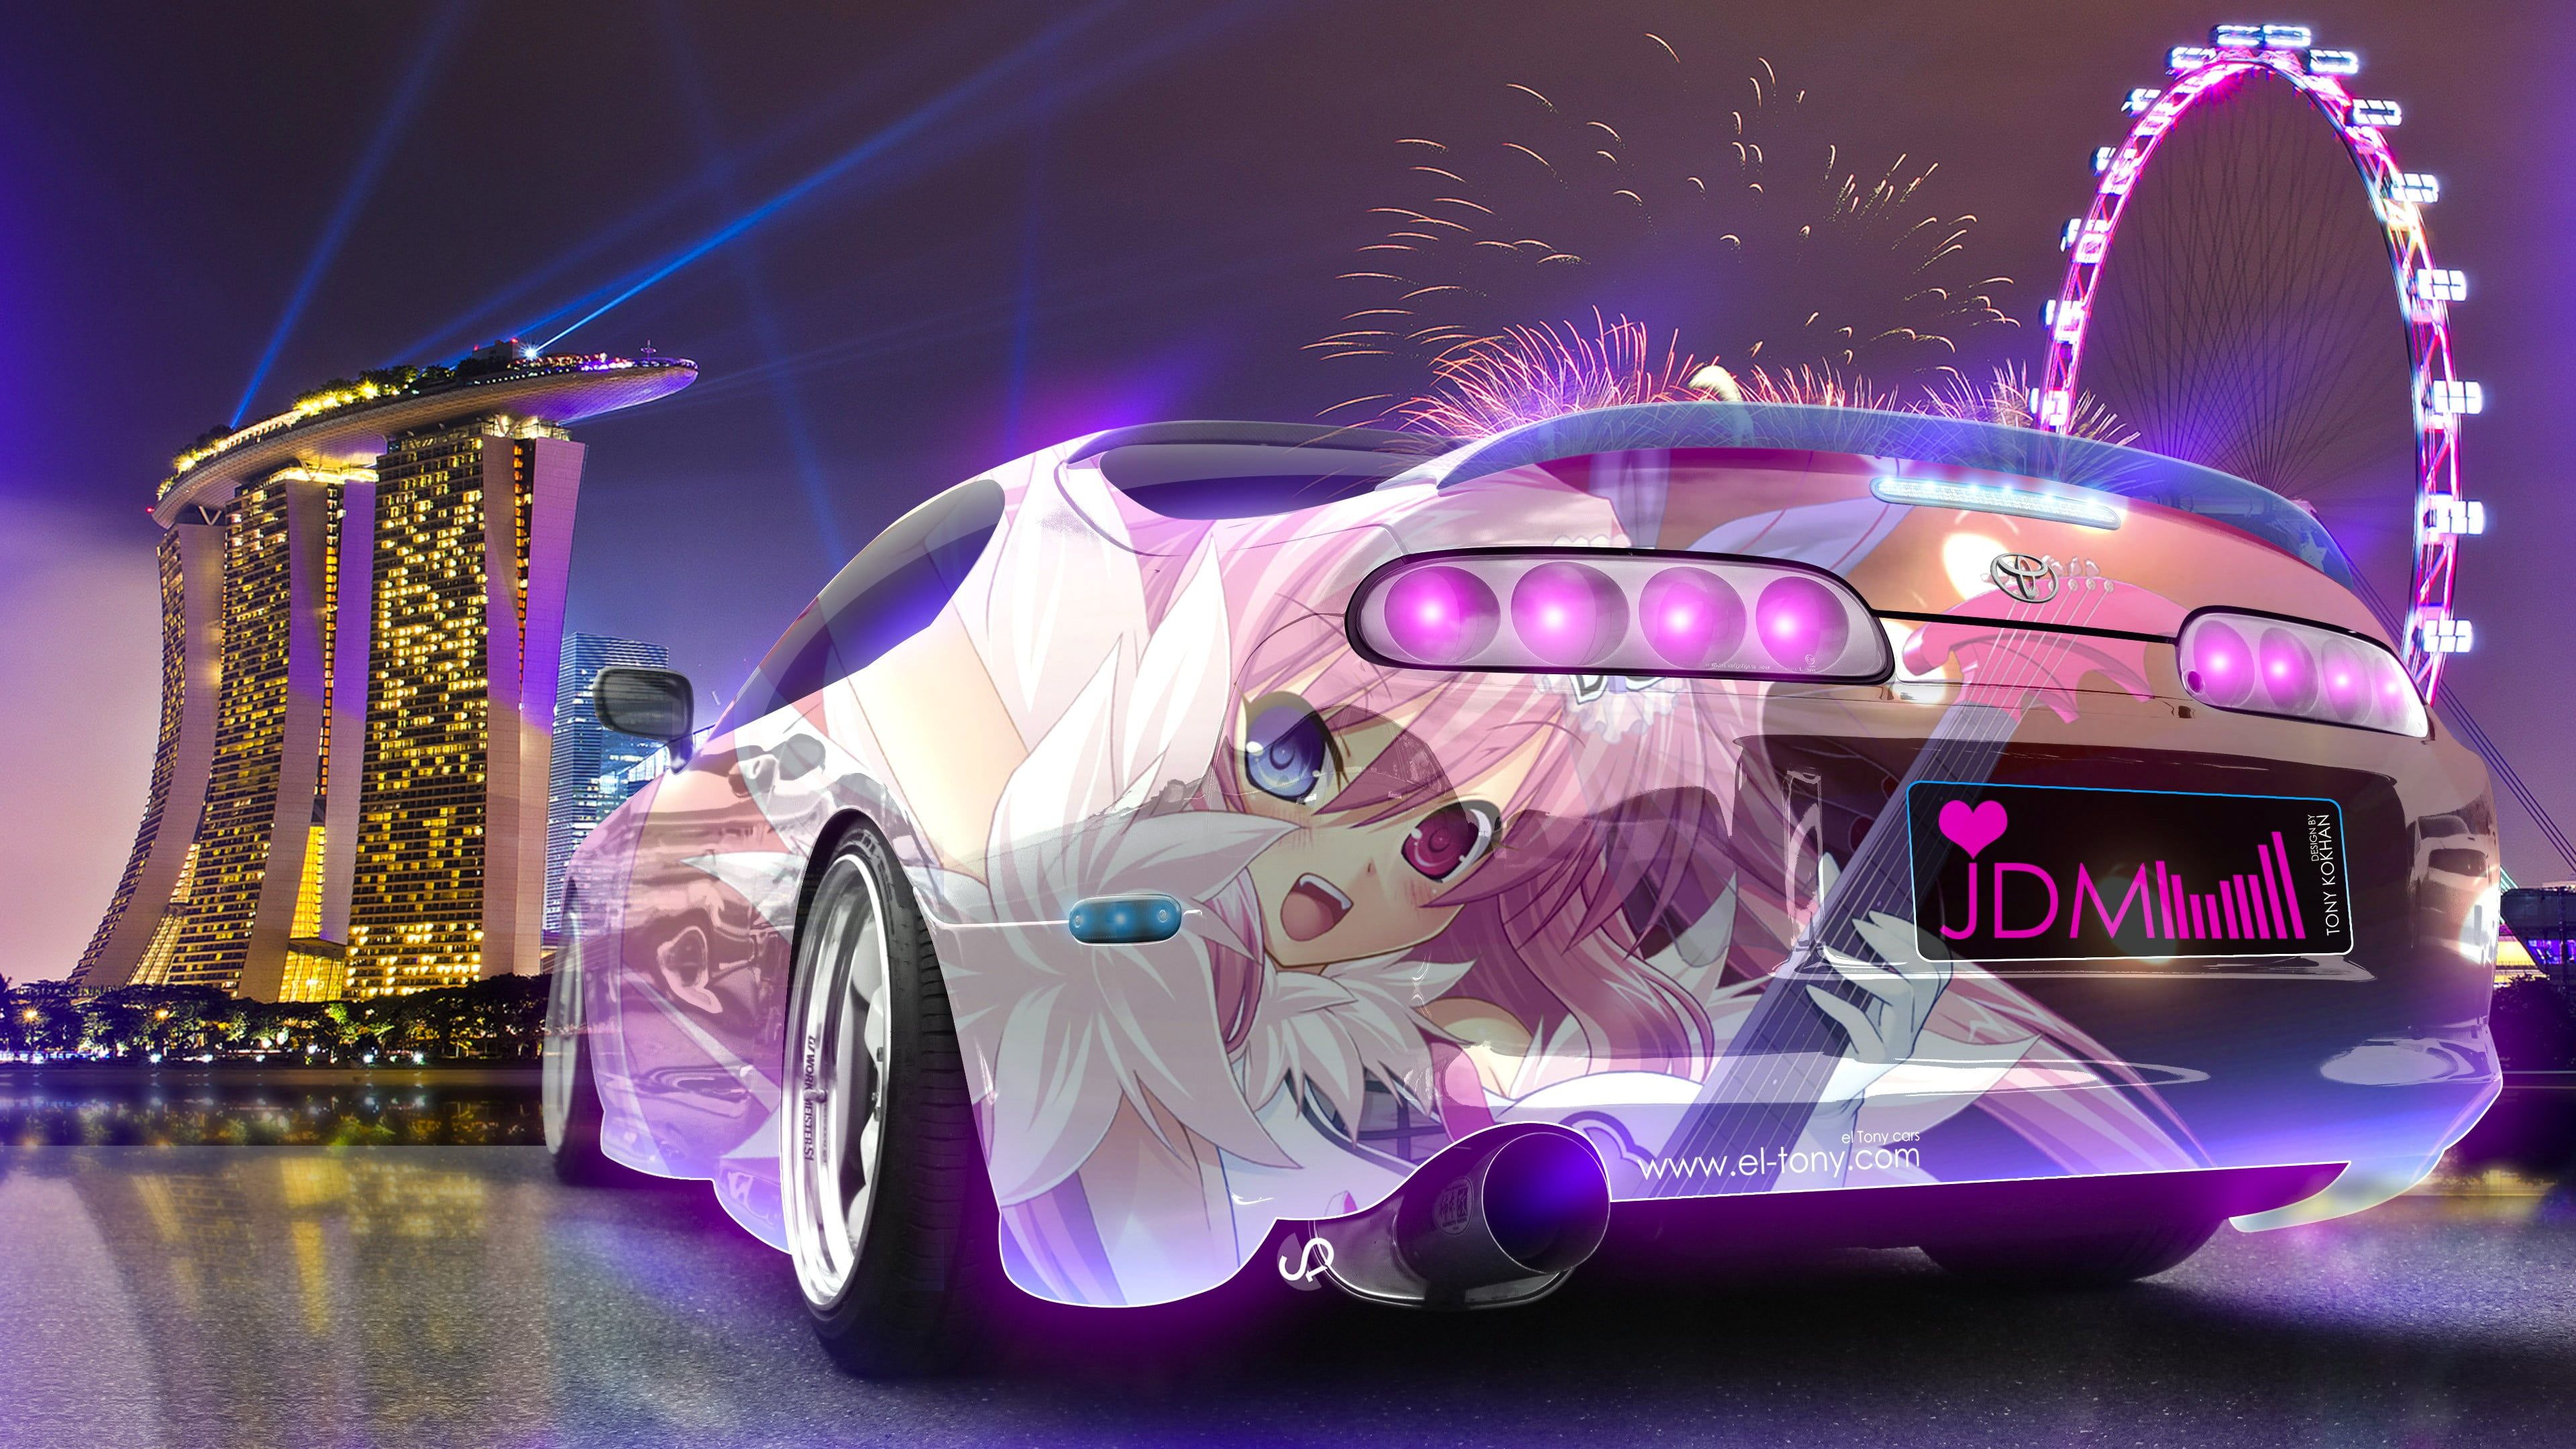 animated character printed white coupe wallpaper Super Car Tony Kokhan #colorful Toyota Supra #JDM #anime K #wall. Toyota supra, Toyota supra mk Jdm wallpaper